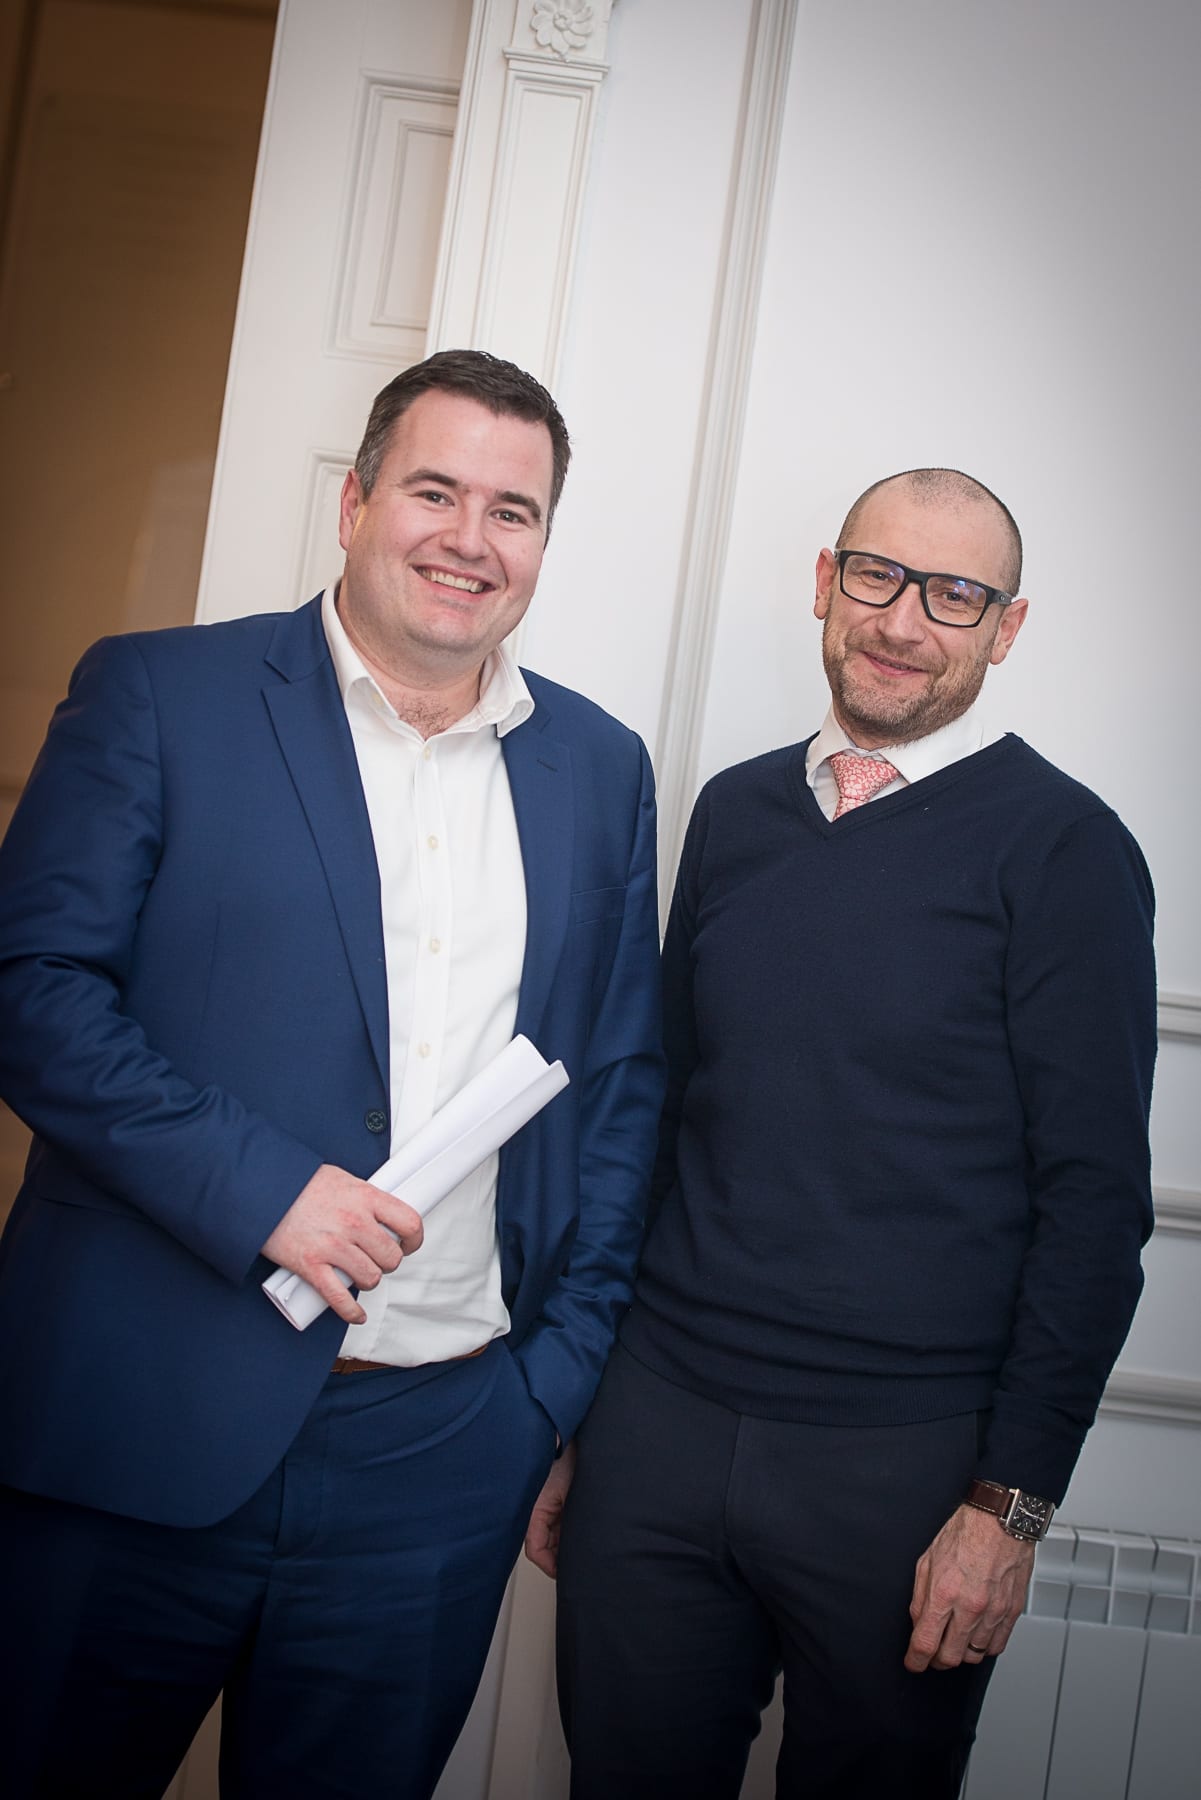 Limerick Chamber AGM which took place in the Limerick Chamber Boardroom on Tuesday 27th Feb 2019:  From left to right:Donal Cantillion - BOI, Donnacha Hurley - Absolute Hotel. 
Image by Morning Star Photography